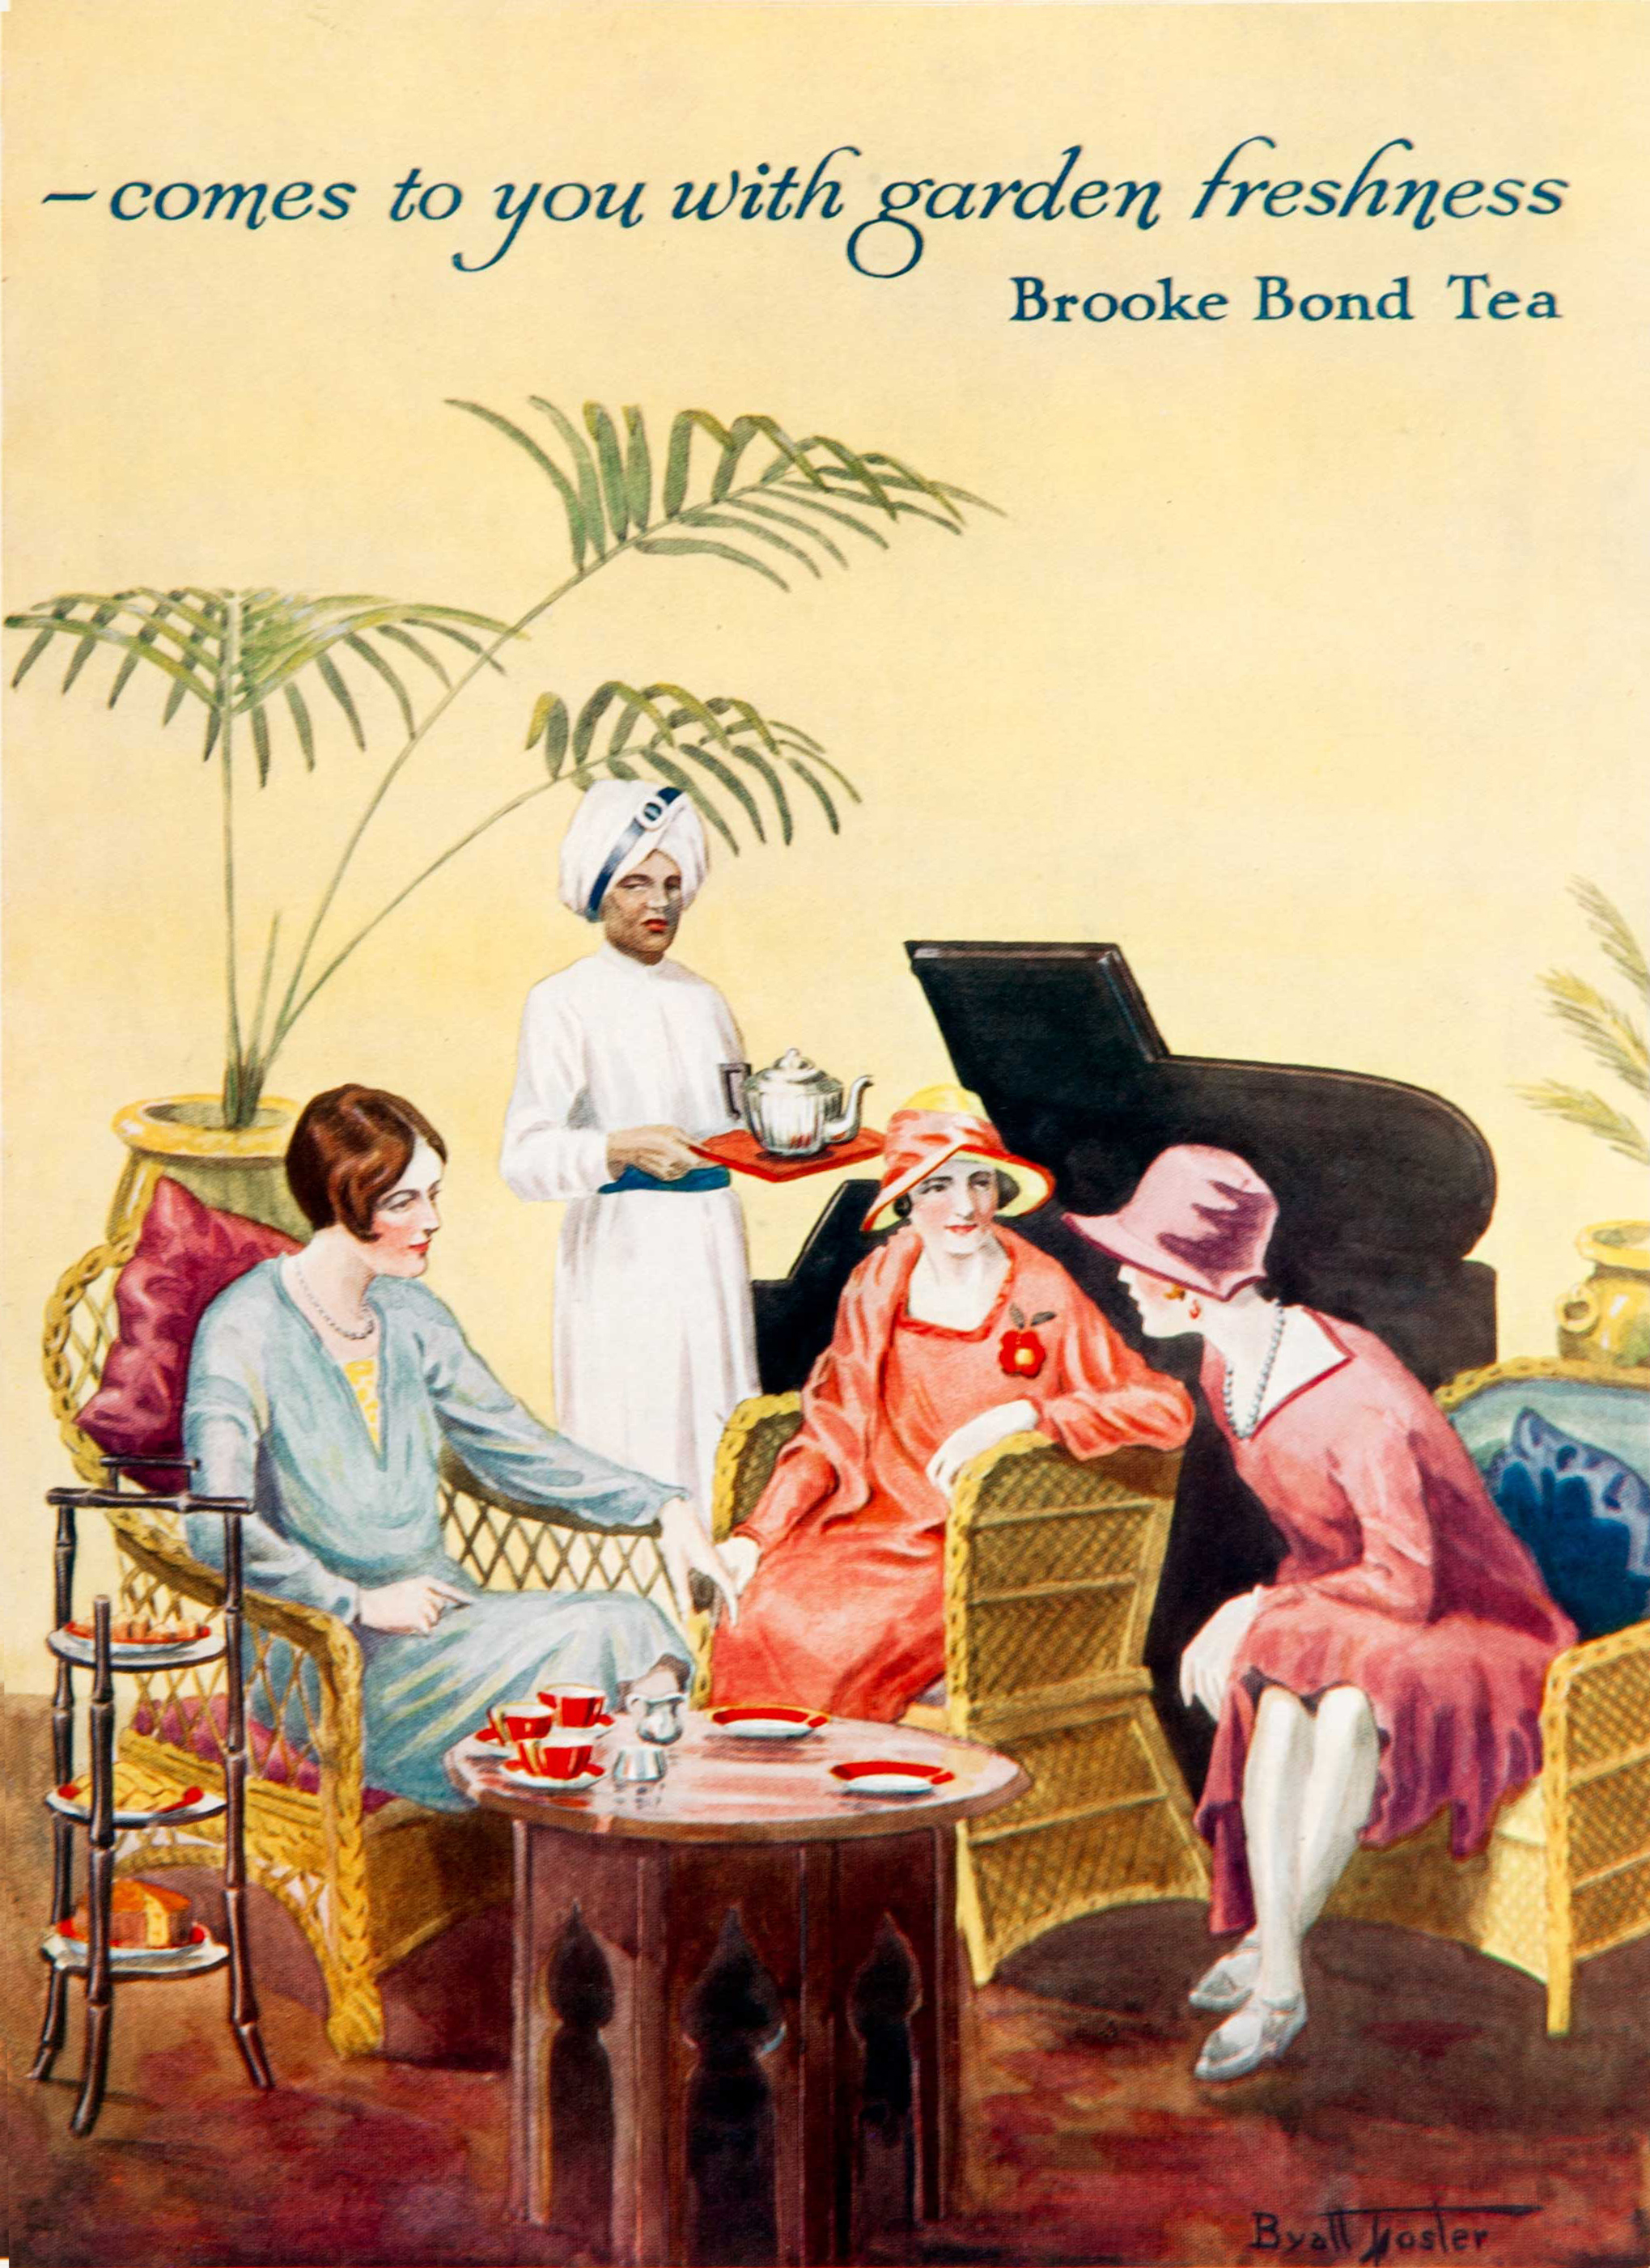 A drawing shows three Caucasian women sitting around a wooden table with teacups on it. An Indian man, wearing a white uniform and a white turban, carries a tray with a teapot and stands behind them. A piano and a large plant are seen in the background. On the top are the words, “Comes to you with garden freshness, Brooke Bond tea.” 